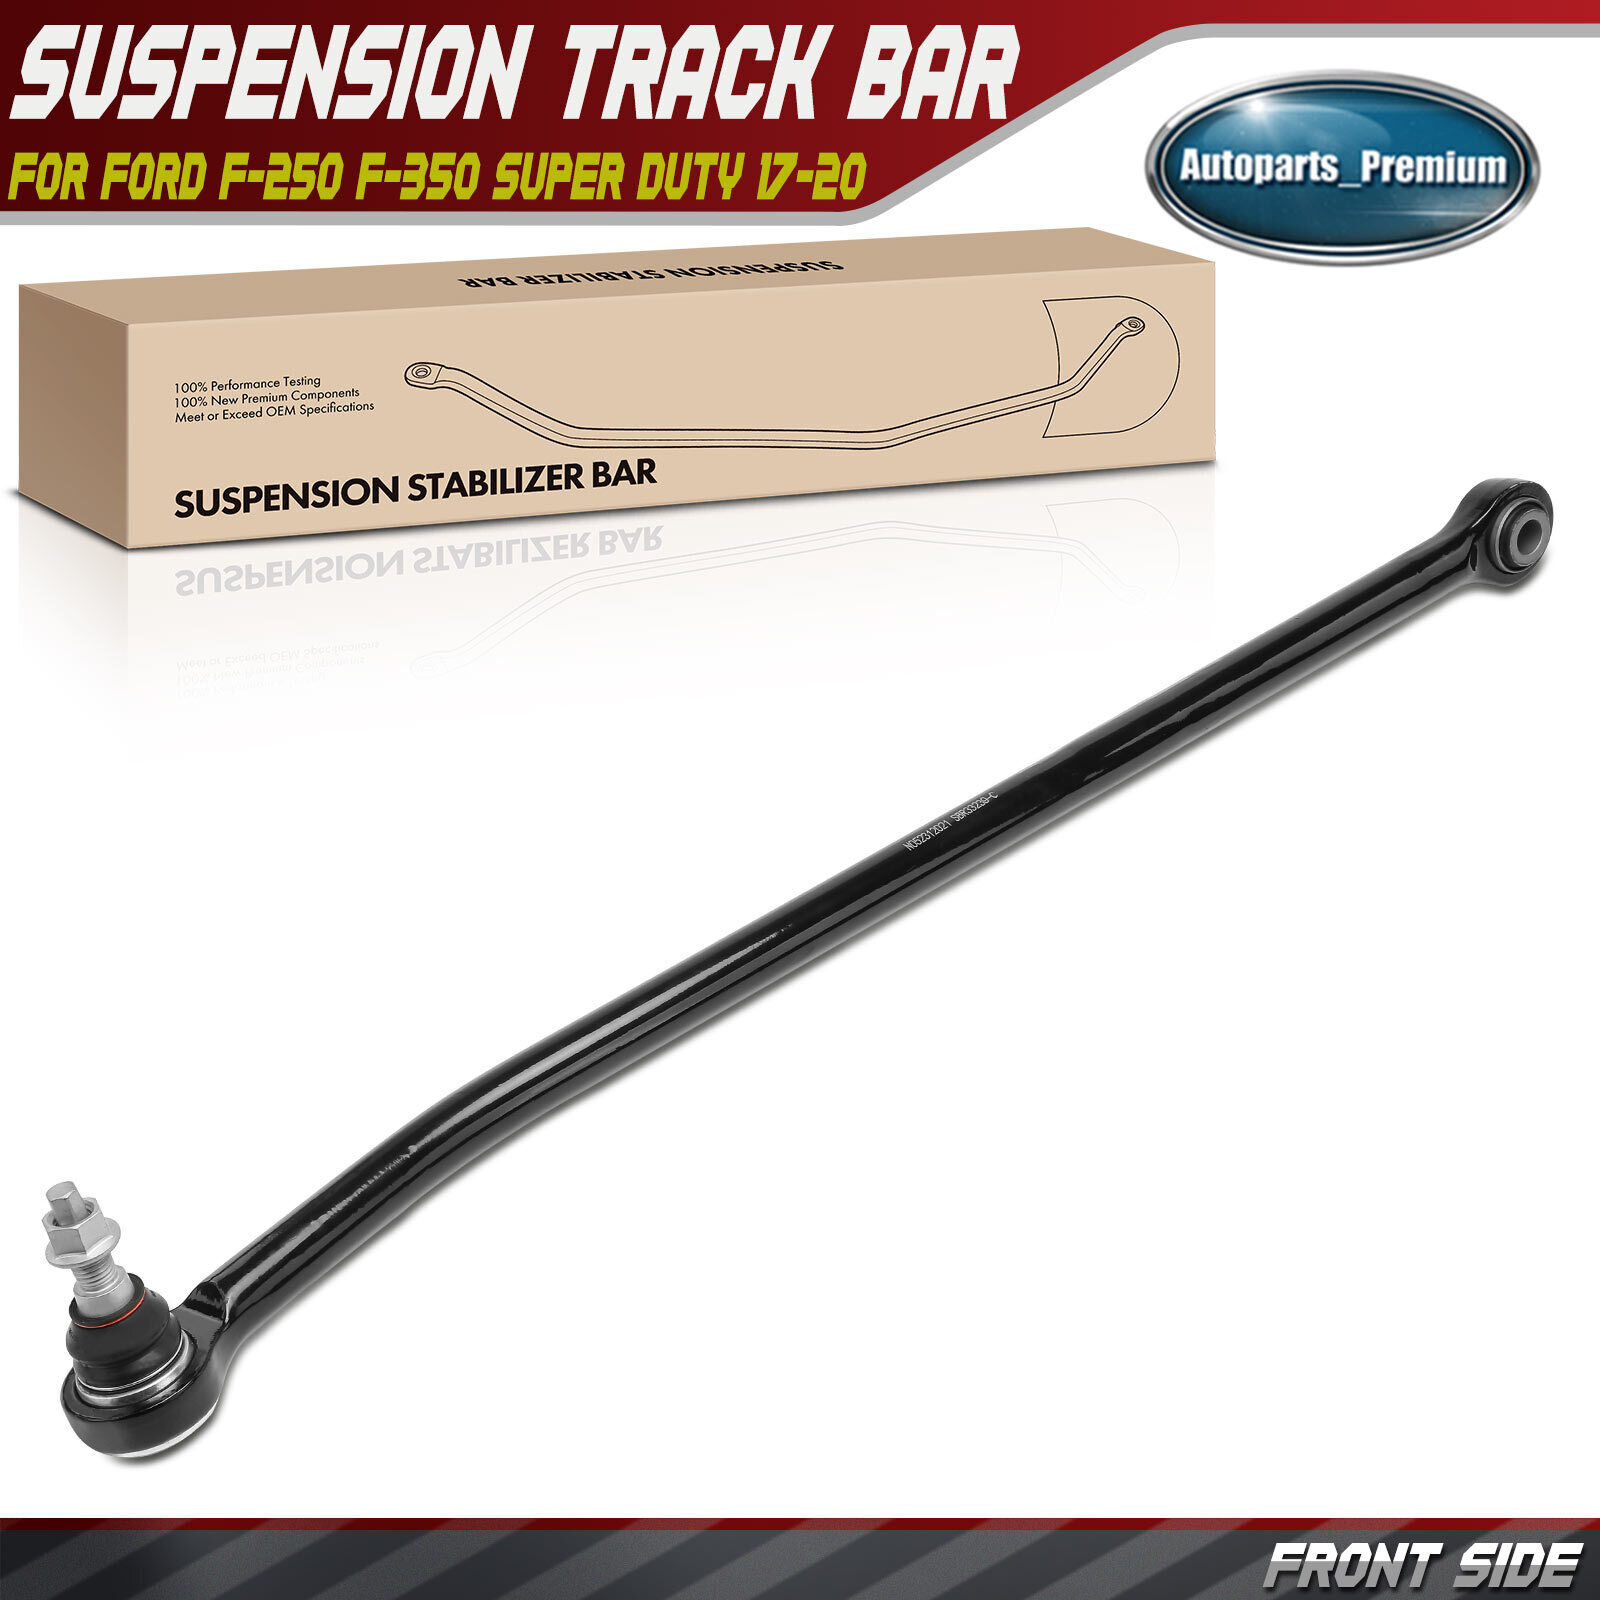 Front Suspension Track Bar for Ford F-250 Super Duty F-350 Super Duty 17-20 4WD